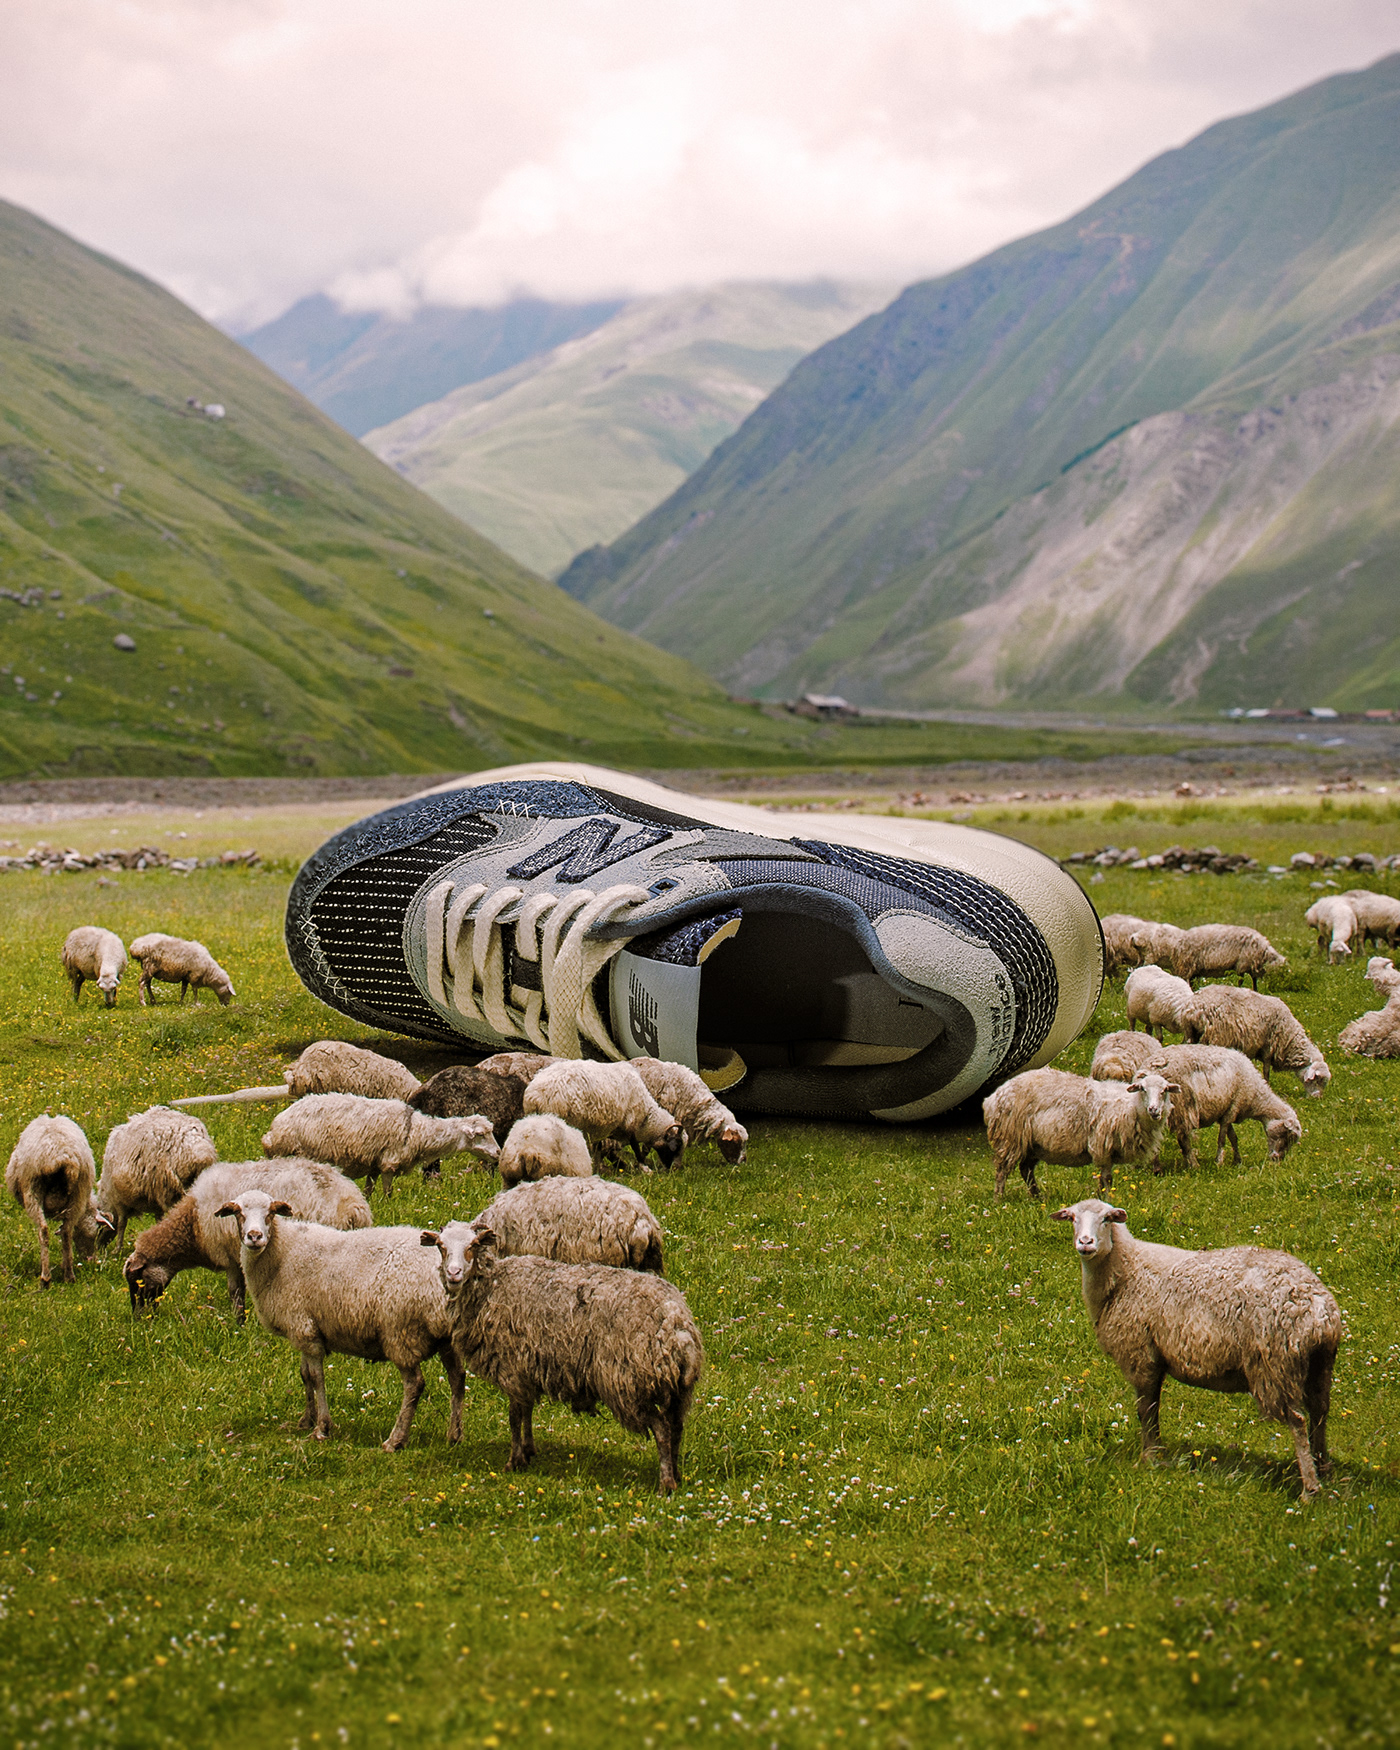 Giant sneaker photo composite. retouching and image manipulation done with photoshop